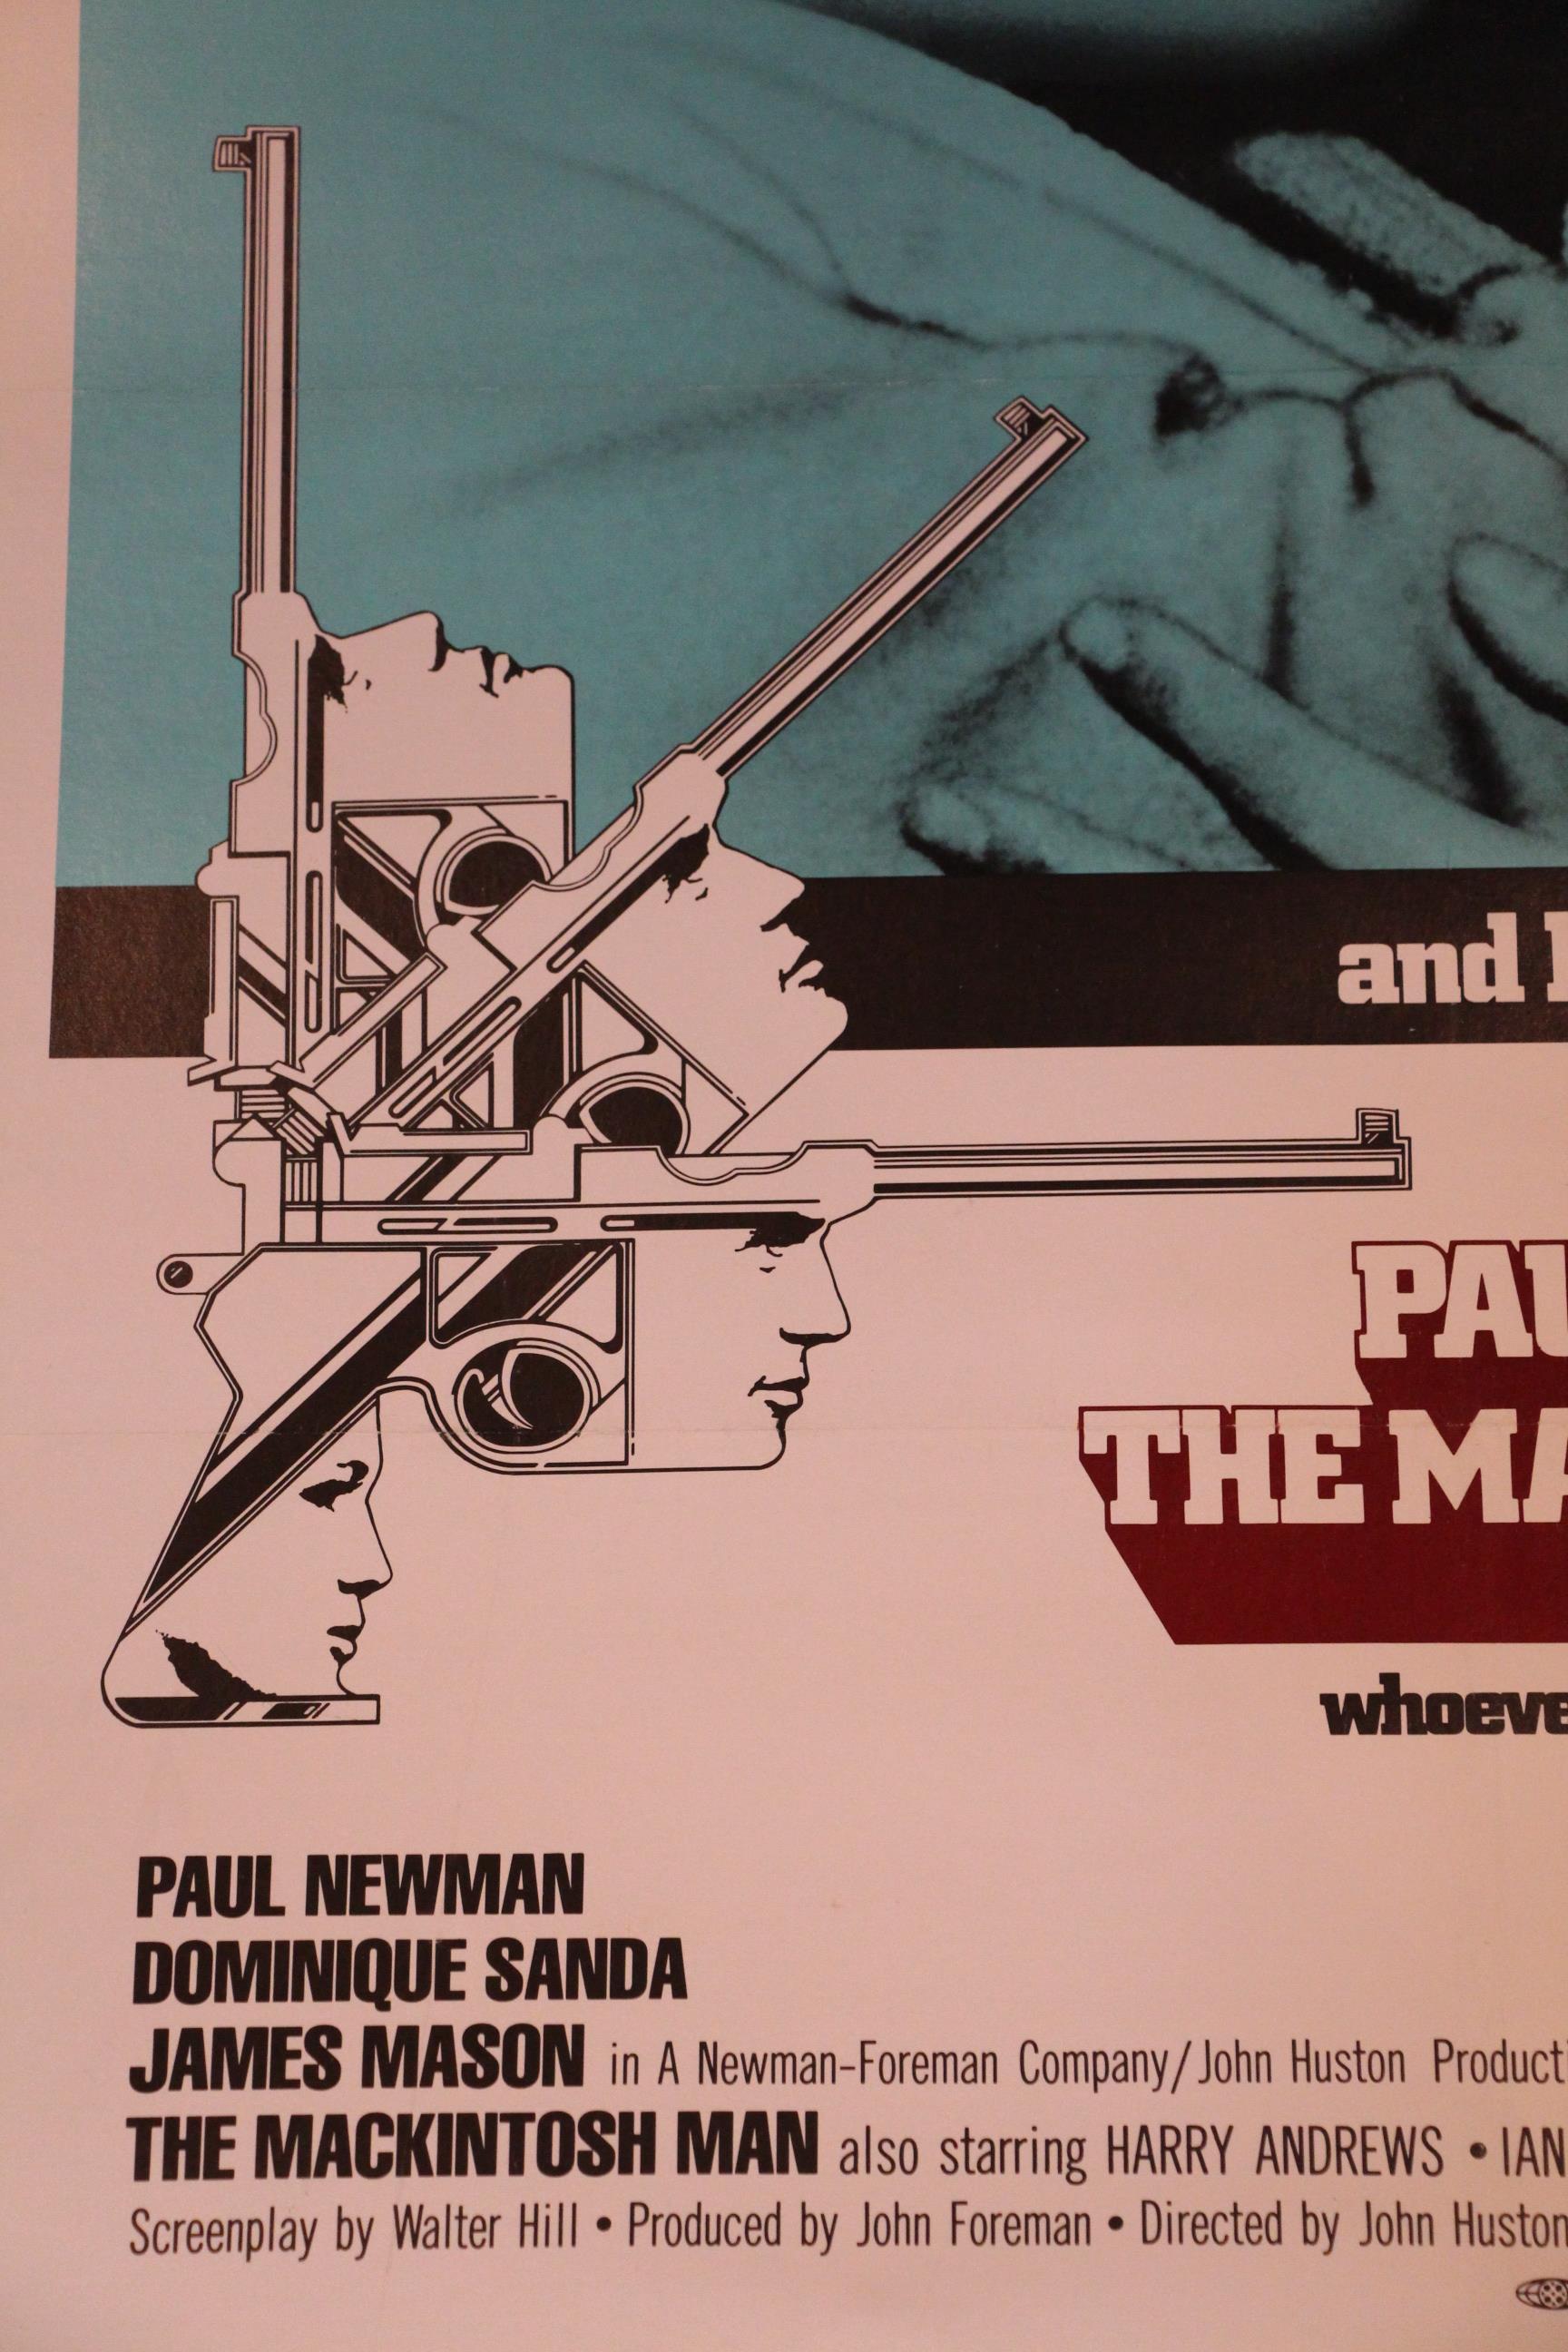 Paul Newman The Mackintosh Man original 1973 US one sheet film poster backed on linen 27 x 41 - Image 3 of 4